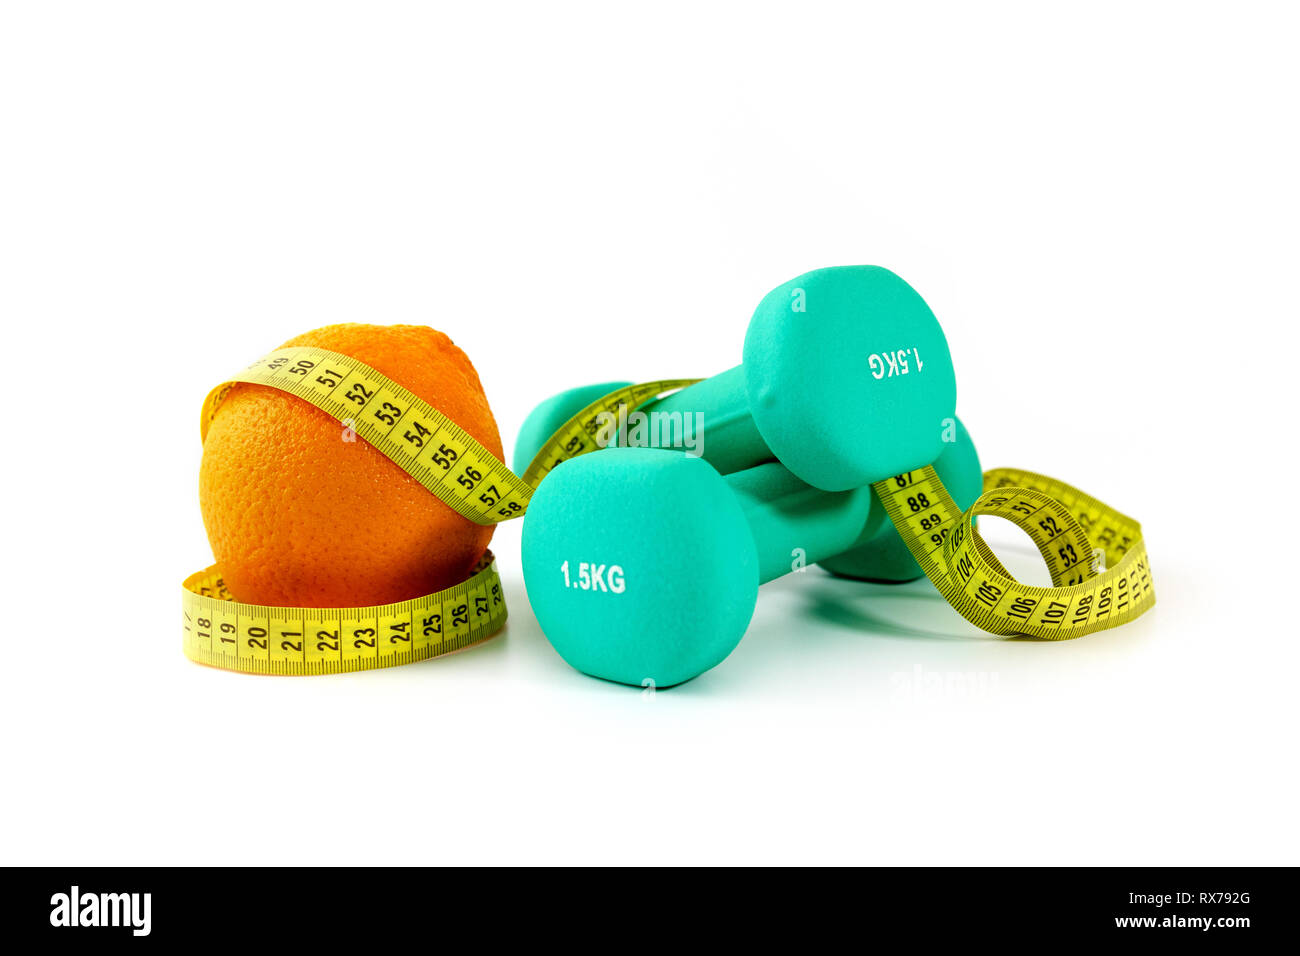 healthy eating and active lifestyle concept - dumbbells with orange and measuring tape Stock Photo